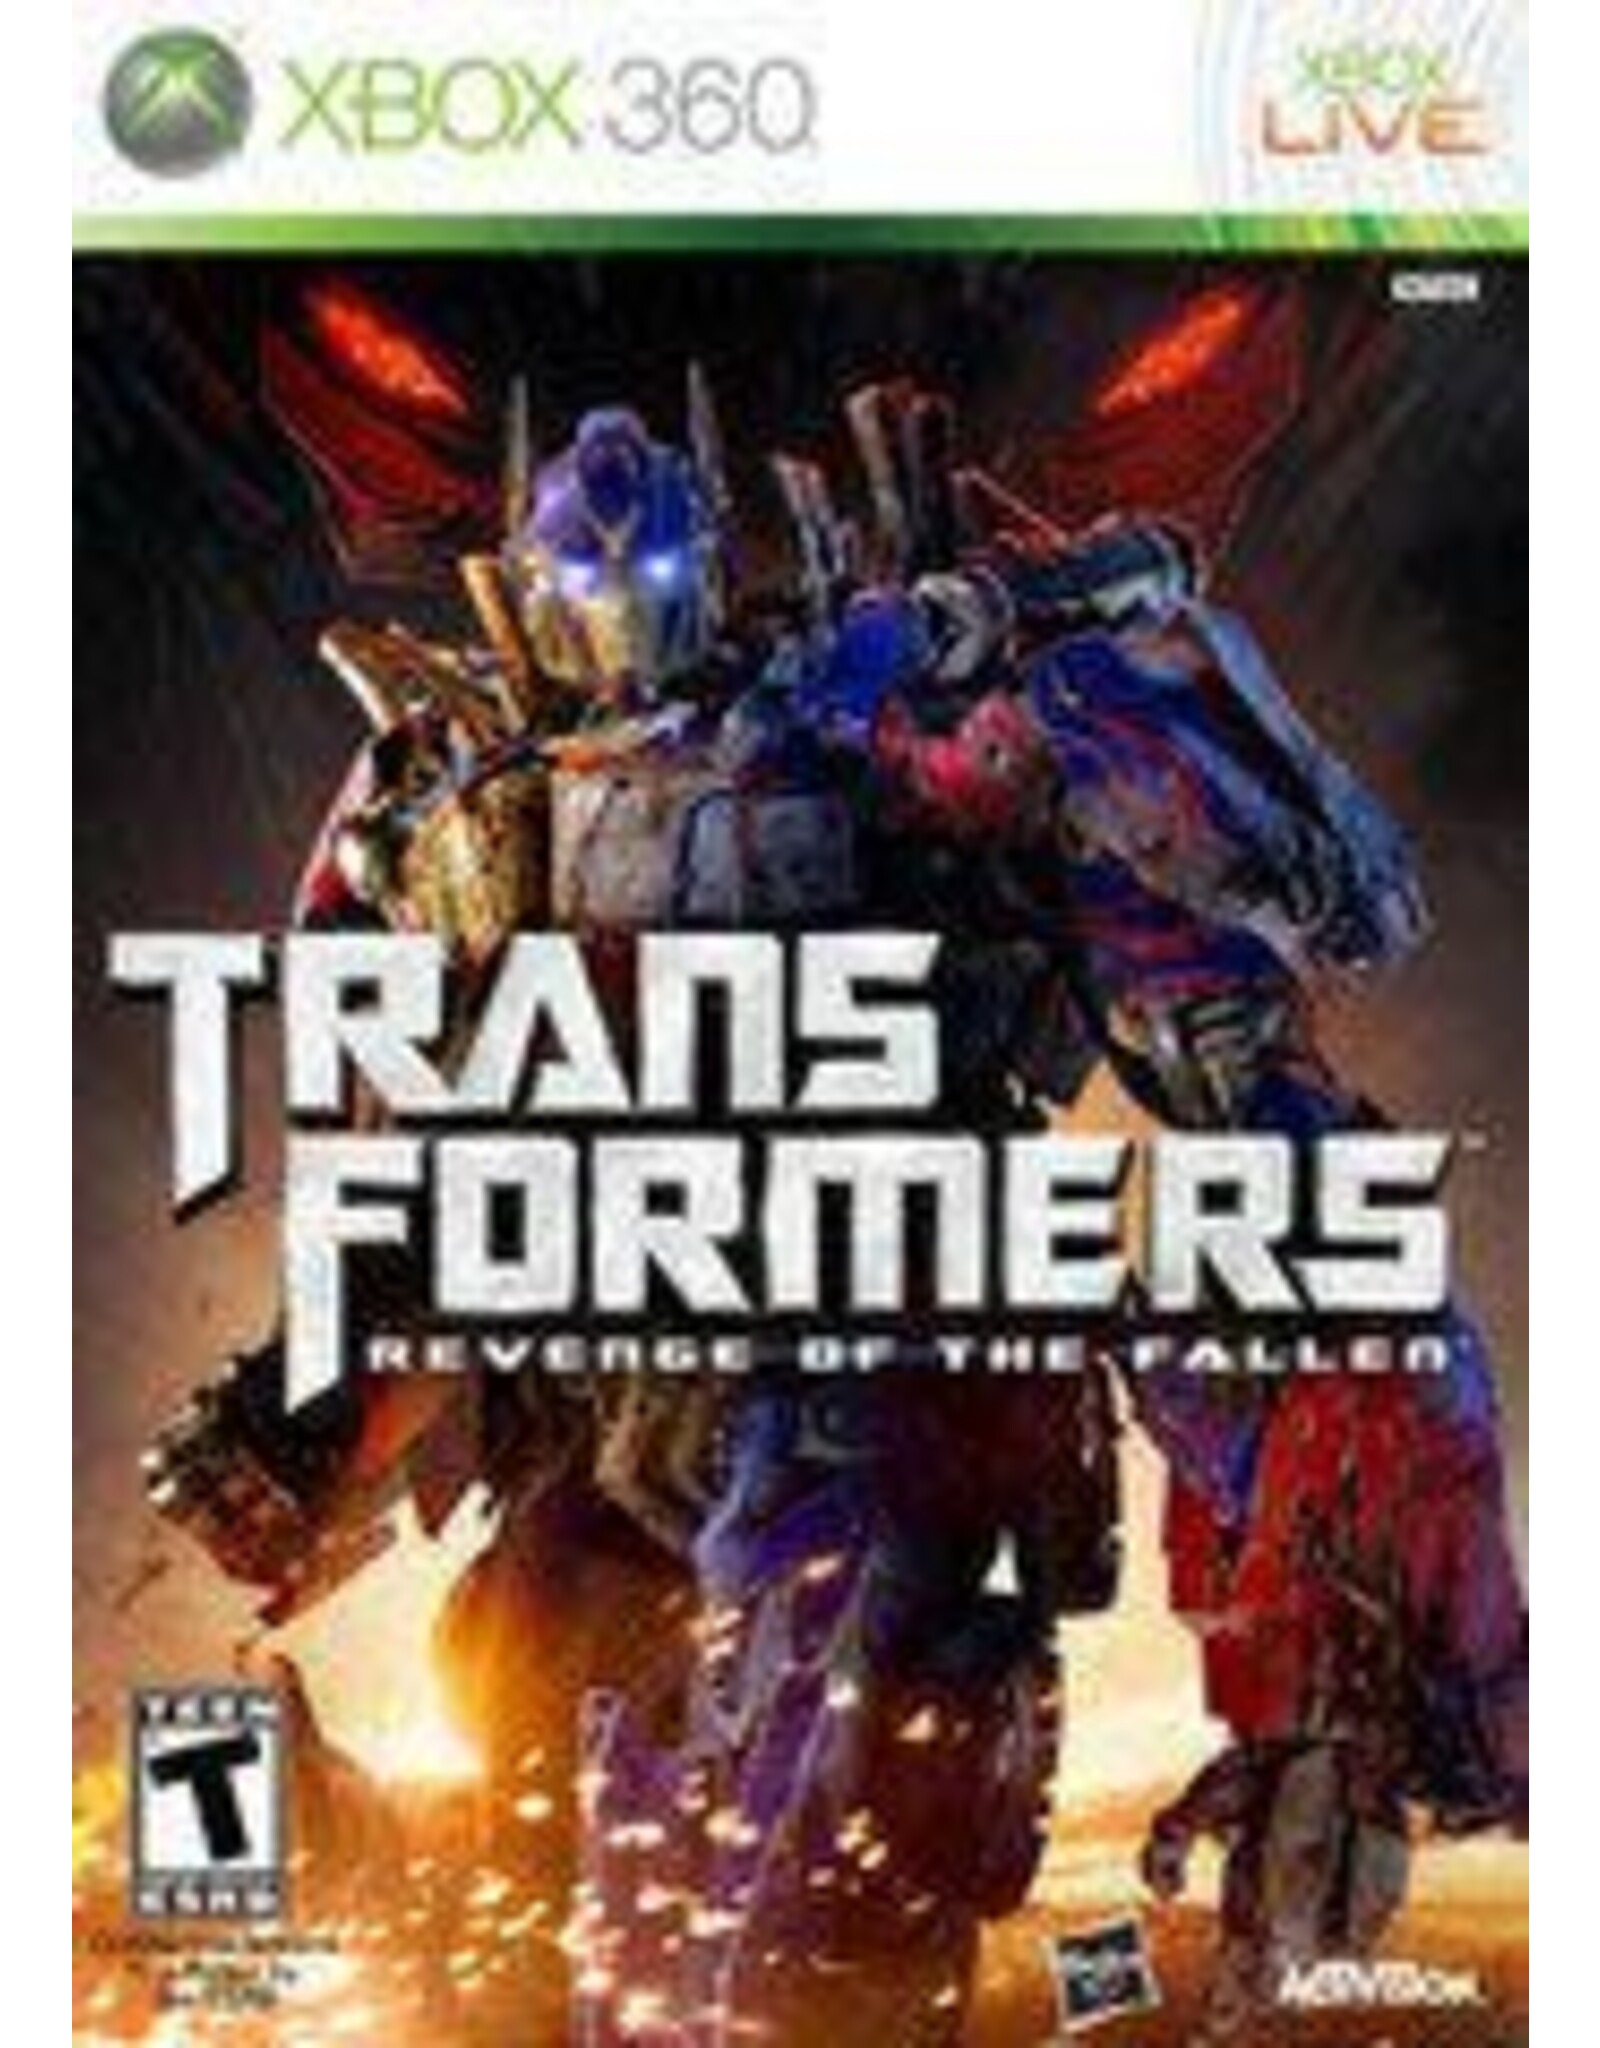 Xbox 360 Transformers: Revenge of the Fallen (Used, No Manual, Cosmetic Damage)